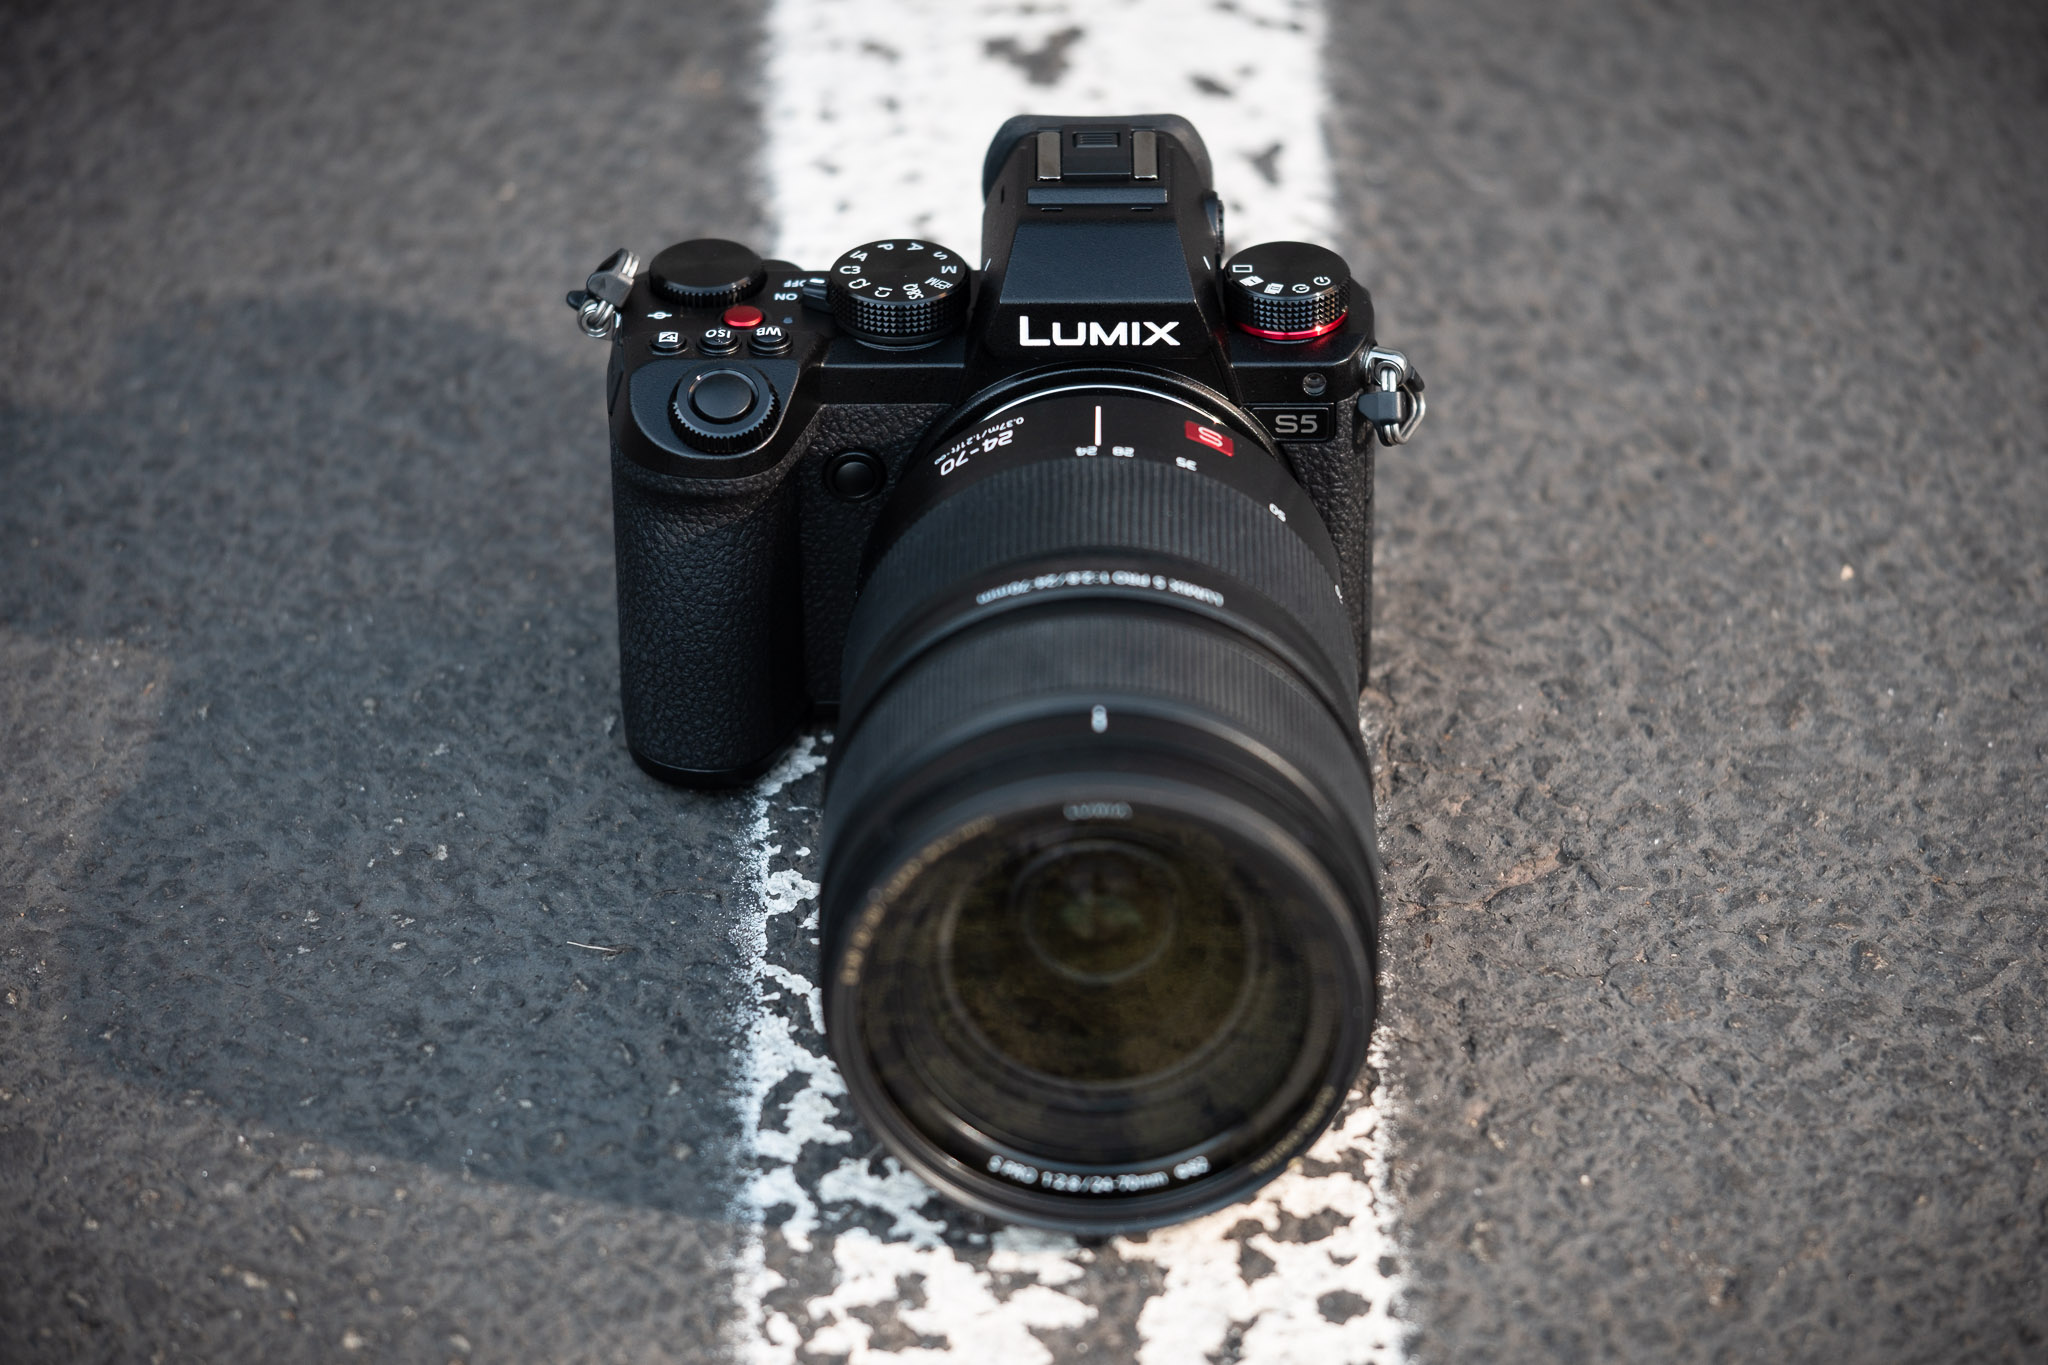 Product photo of Panasonic Lumix S5 camera with Panasonic 24-70mm f/2.8 lens attached.